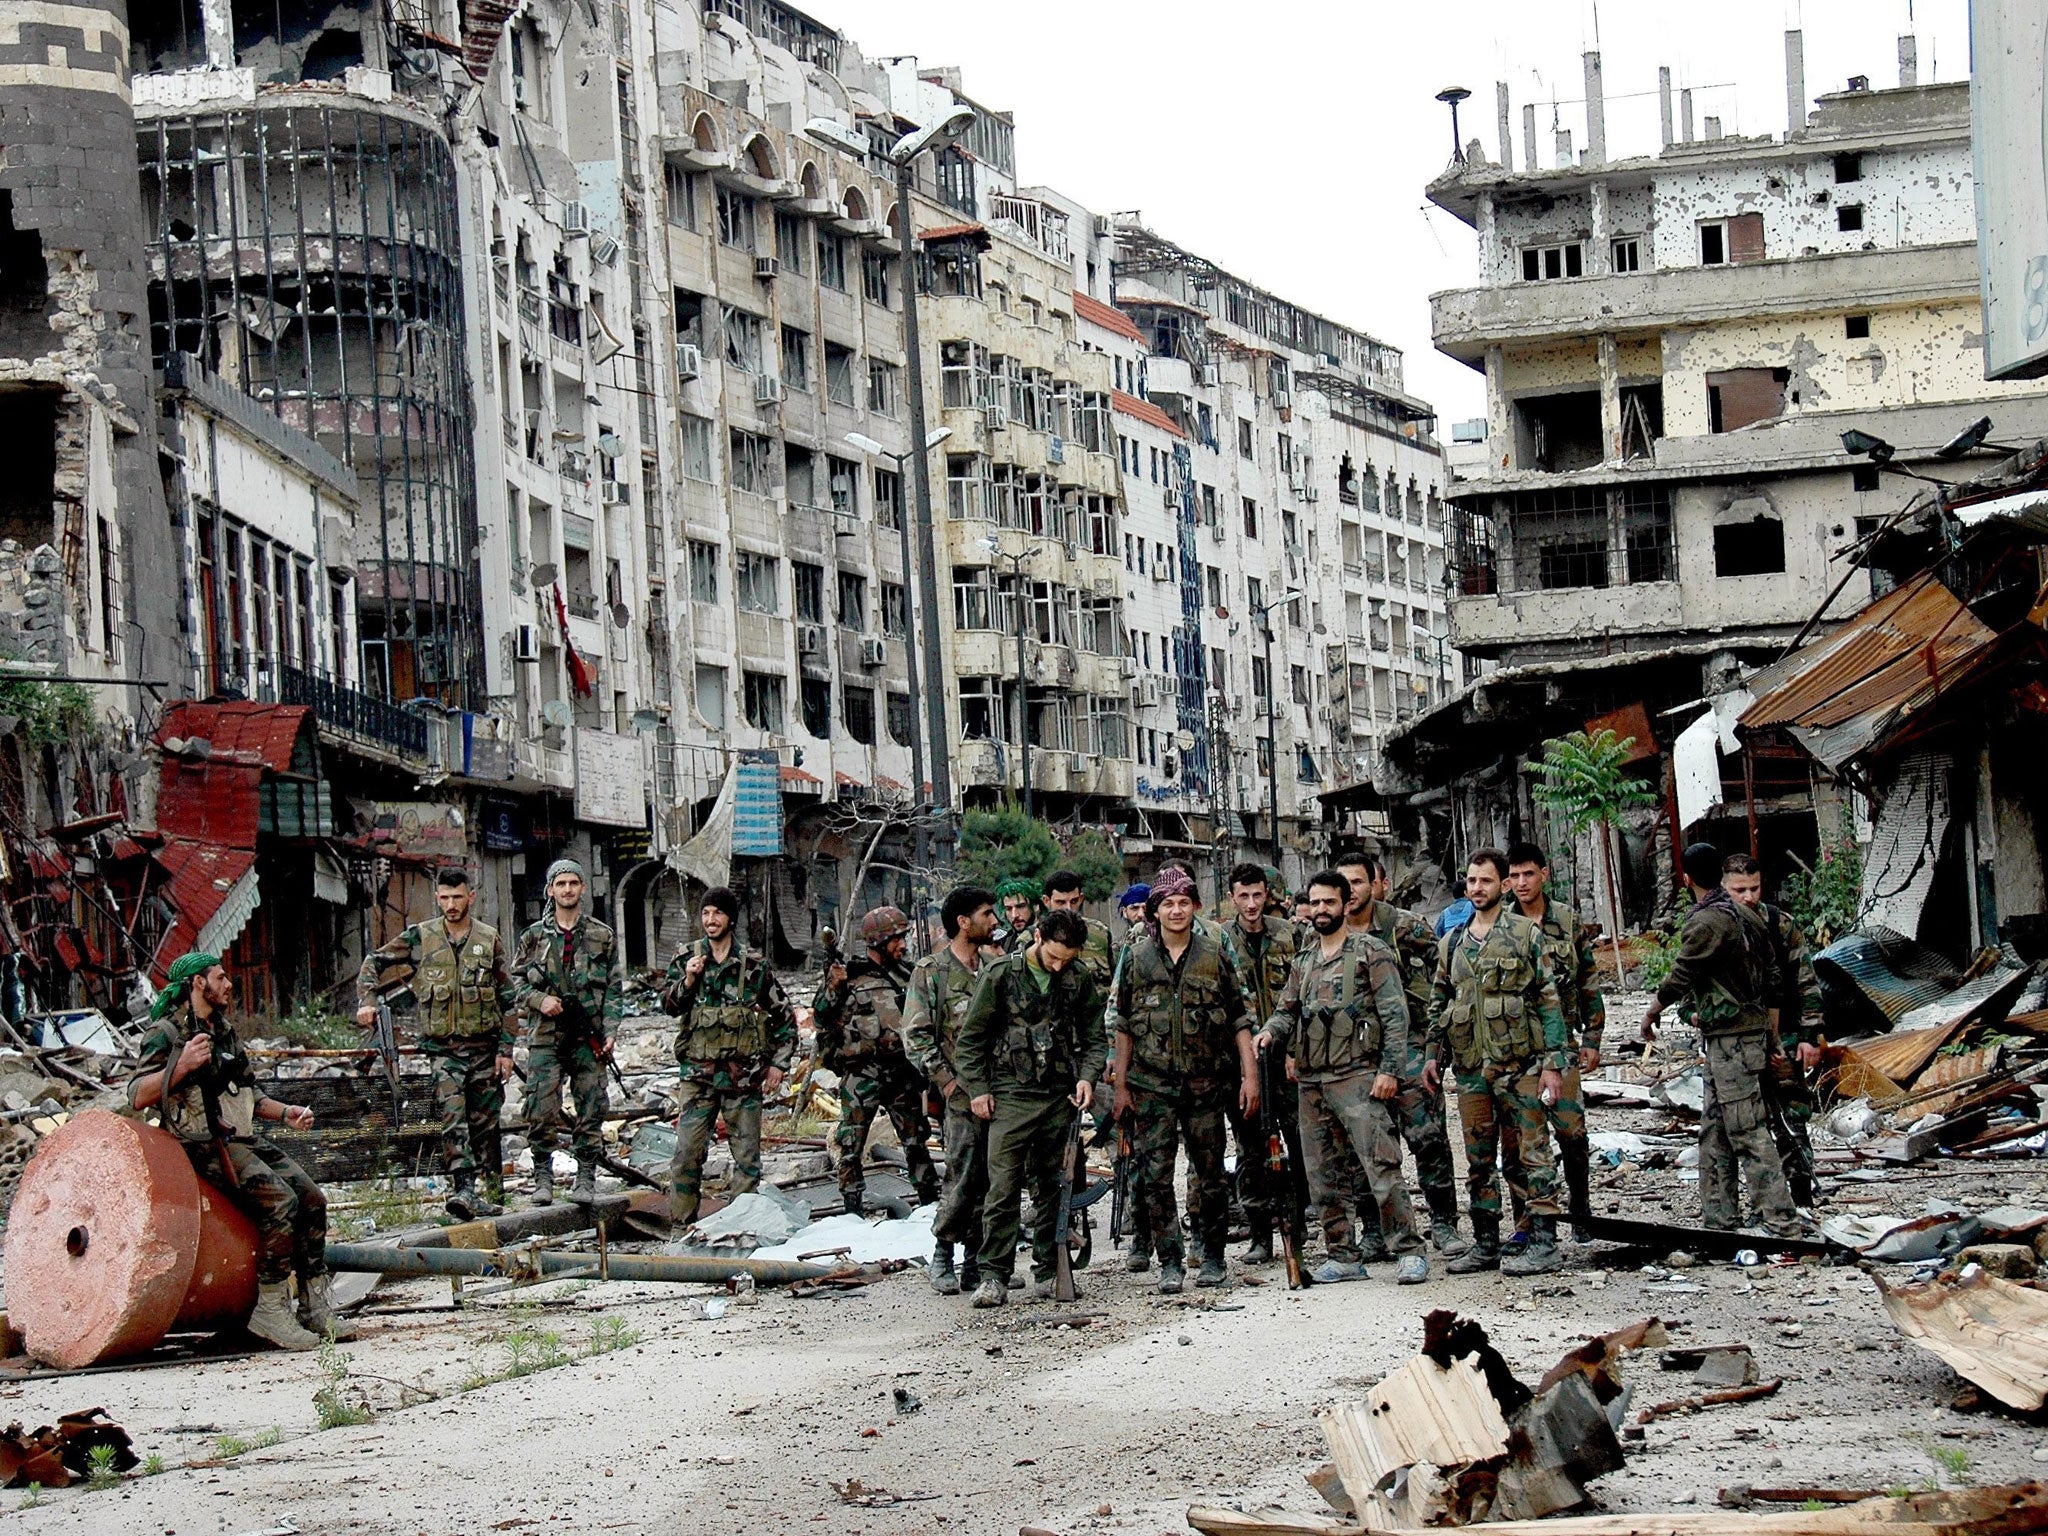 Syrian army forces stand on a street at the entrance of Hamidiya market in the old city of Homs